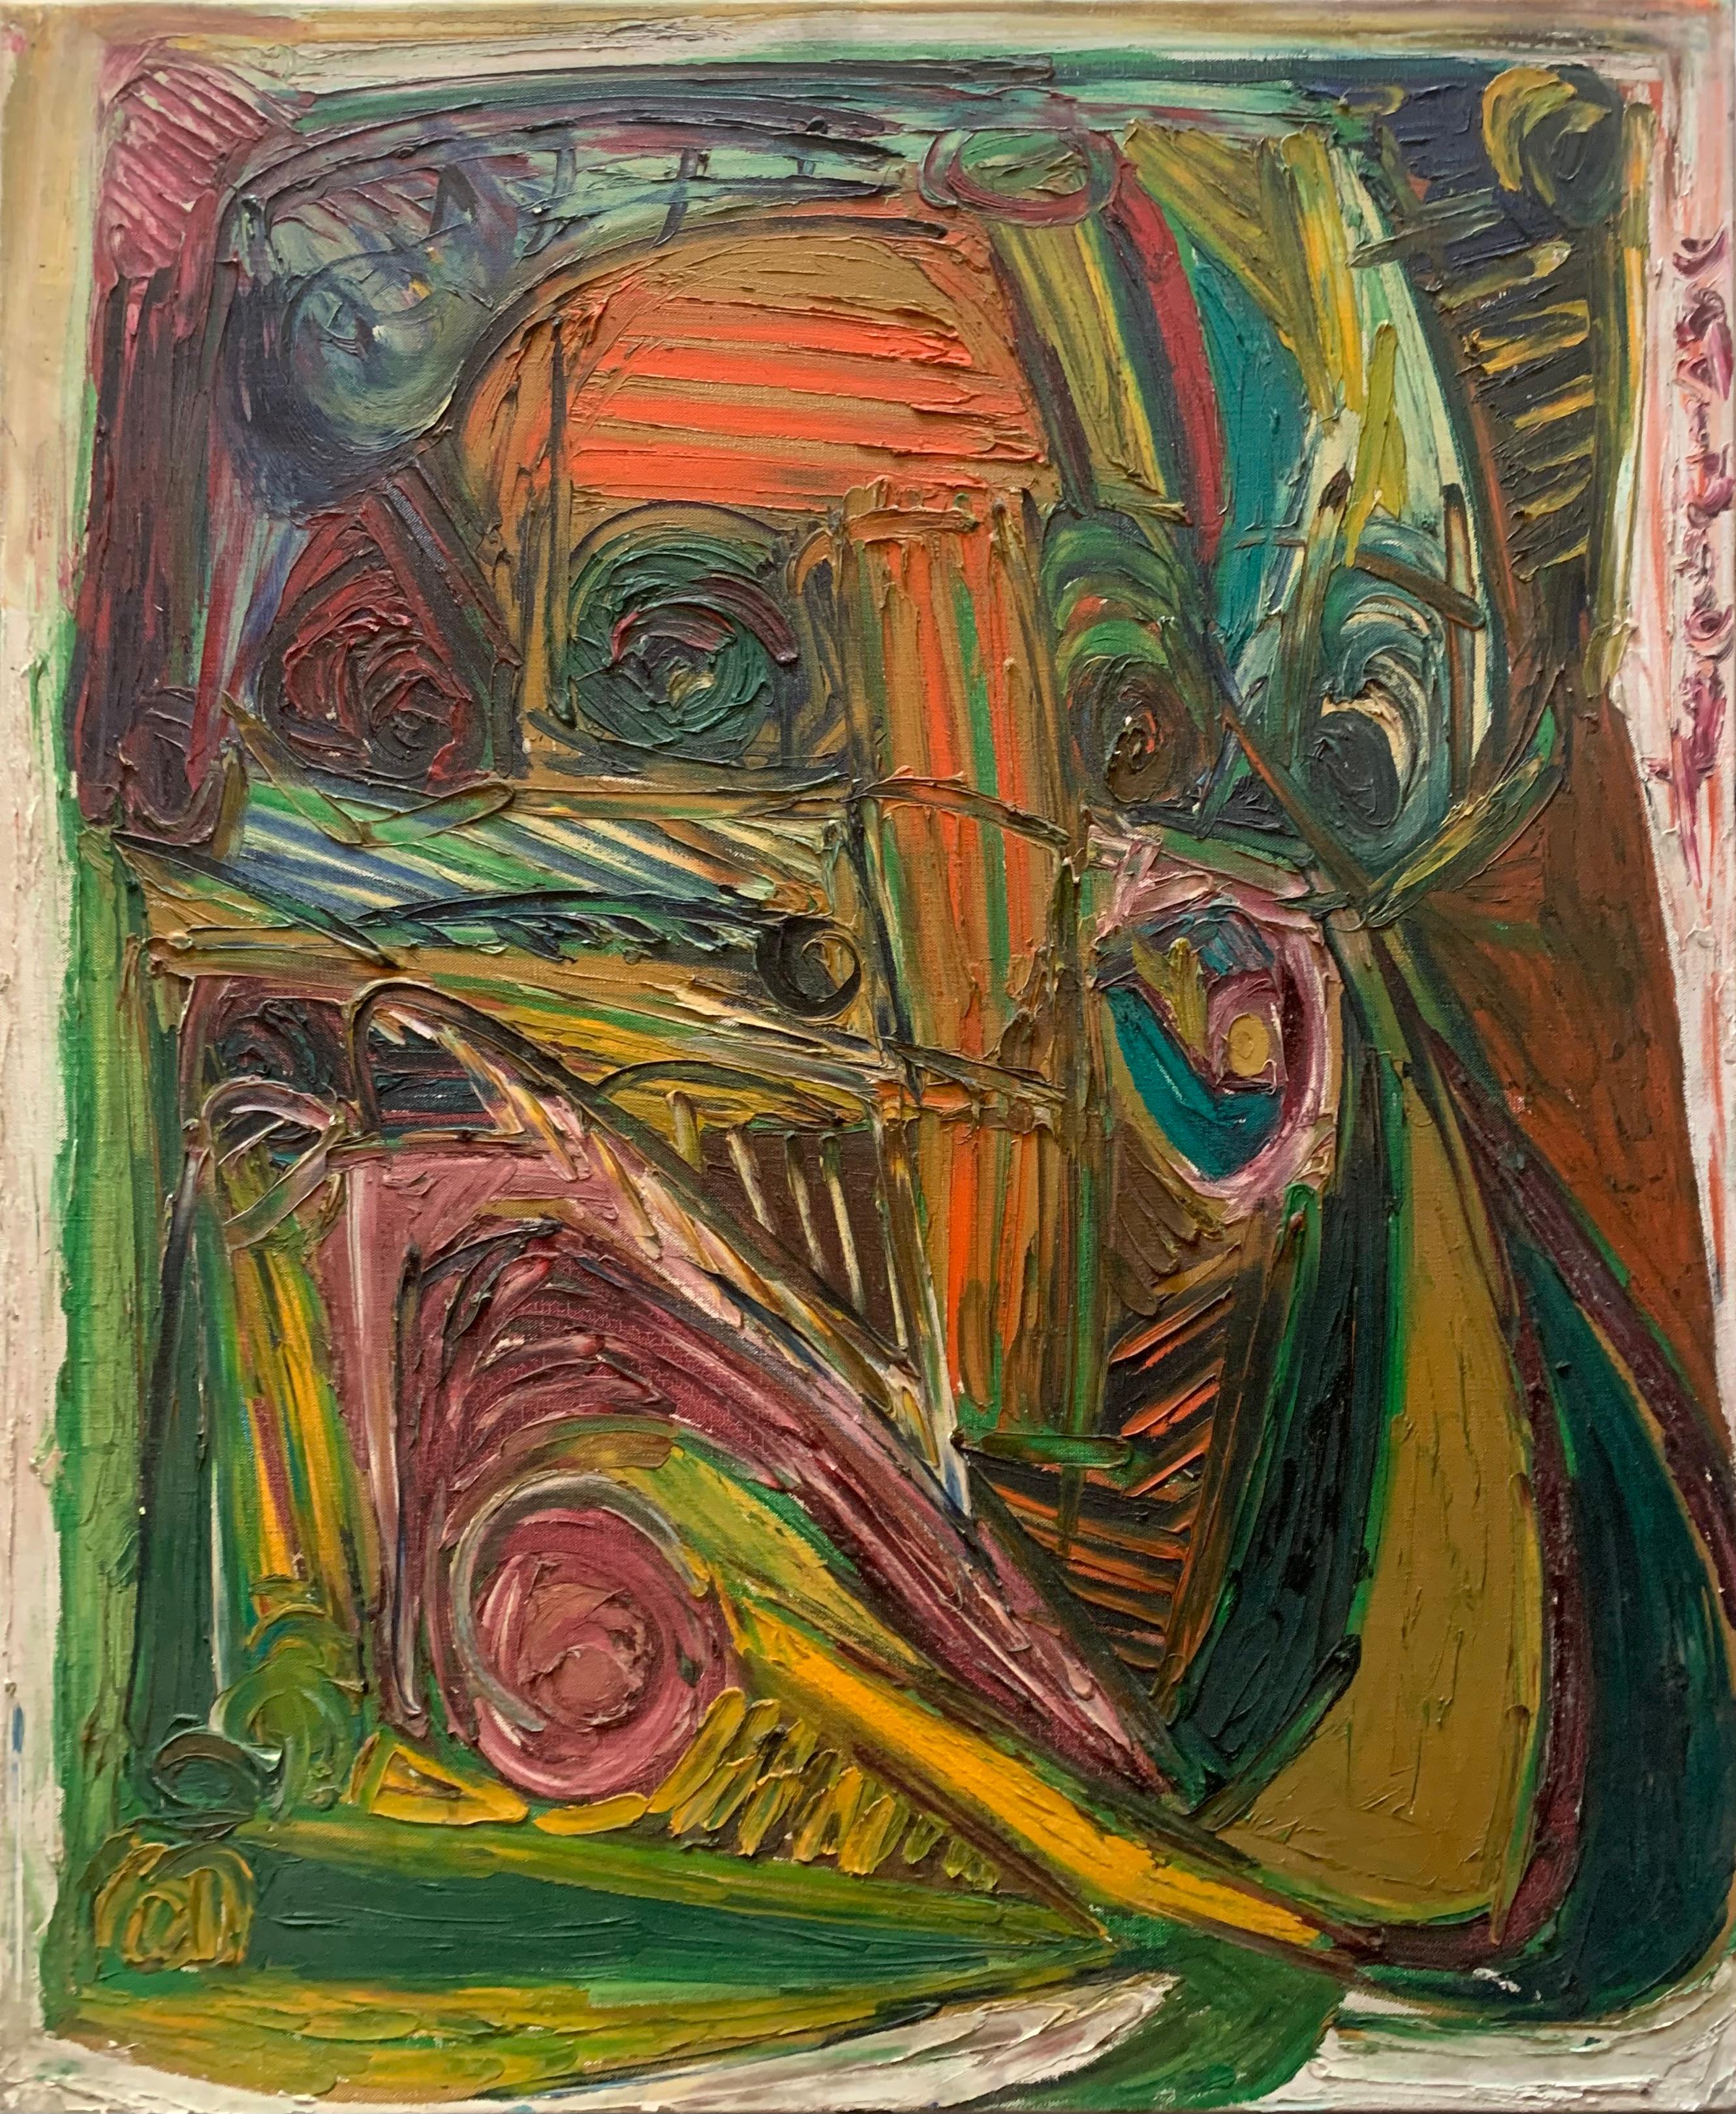 A geometric Play of Masks, Eyes and Lines. Post war Expressionist. 1970's.